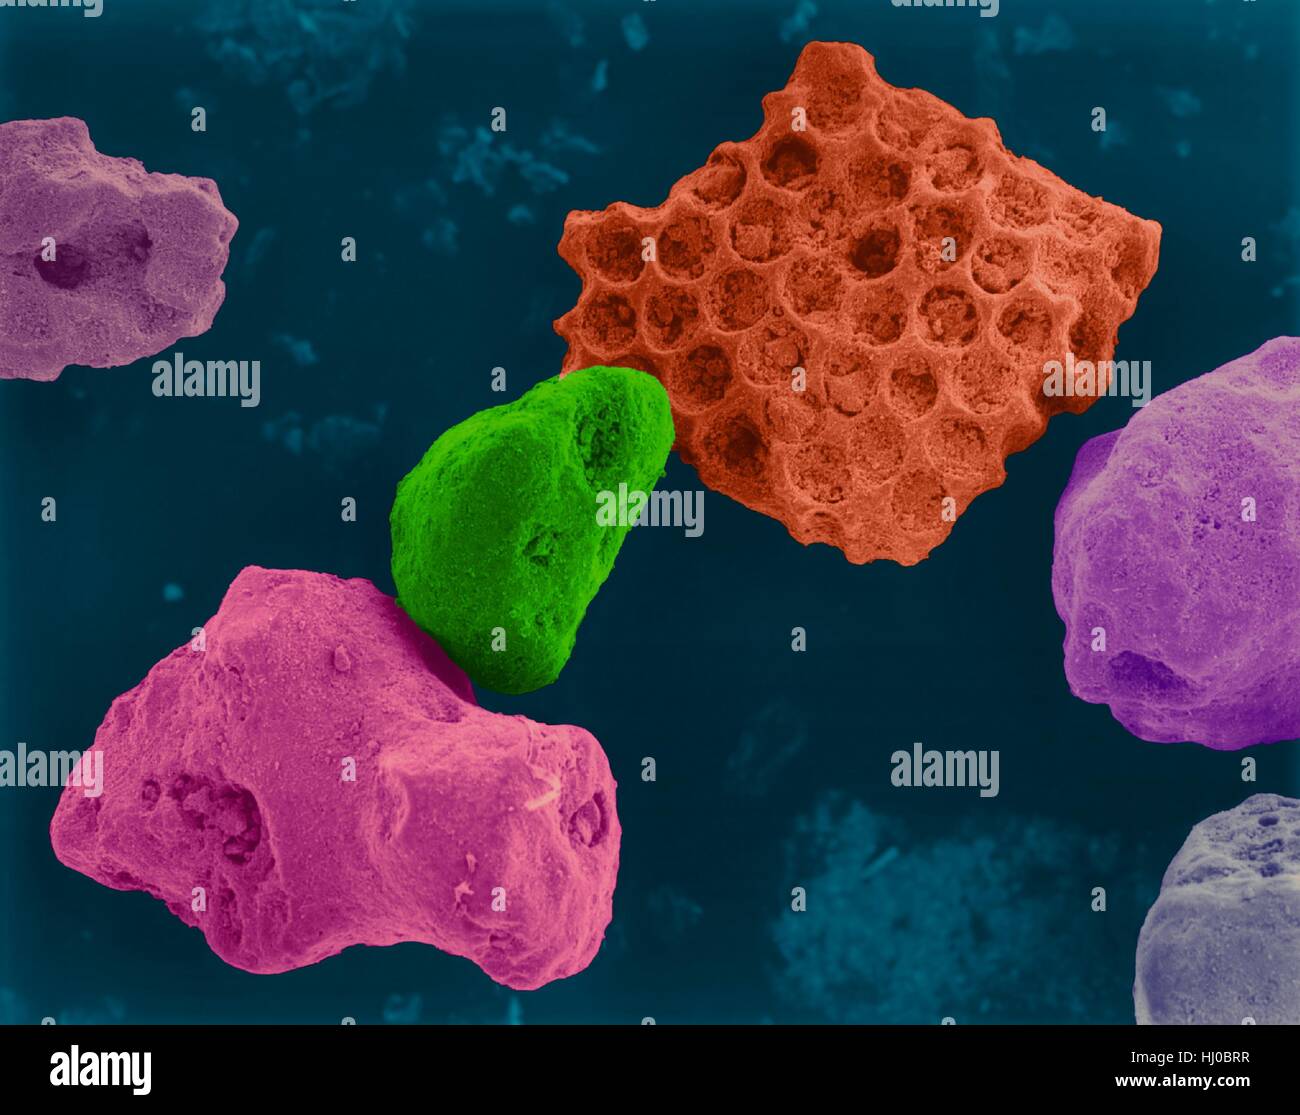 Coloured scanning electron micrograph (SEM) of Coral sand (Kailua, Hawaii). Beach sand contains both rock minerals and skeletons that have been derived from living organisms (such as coral). Sand grains produced from coral have fine holes and are smoother due to wearing down by the surface action. Magnification: x43 when shortest axis printed at 25 millimetres. Stock Photo